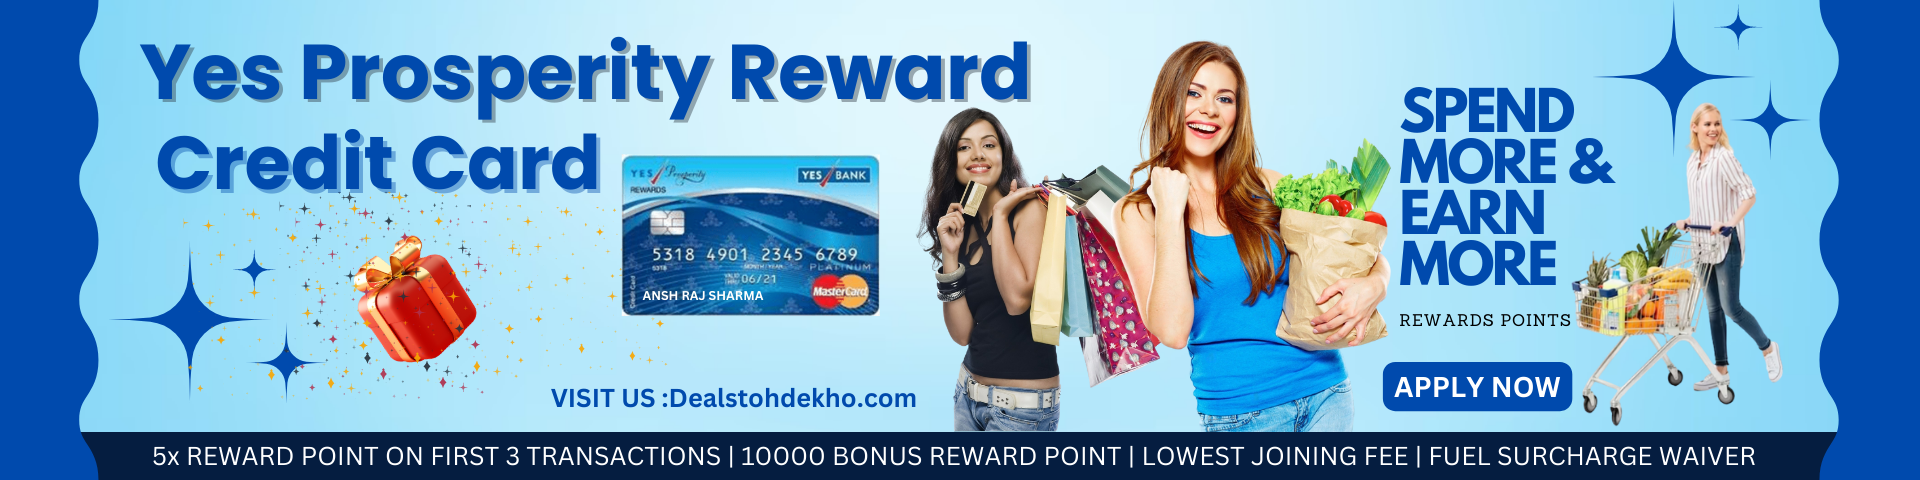 Apply online and get instant approval for yes bank credit card